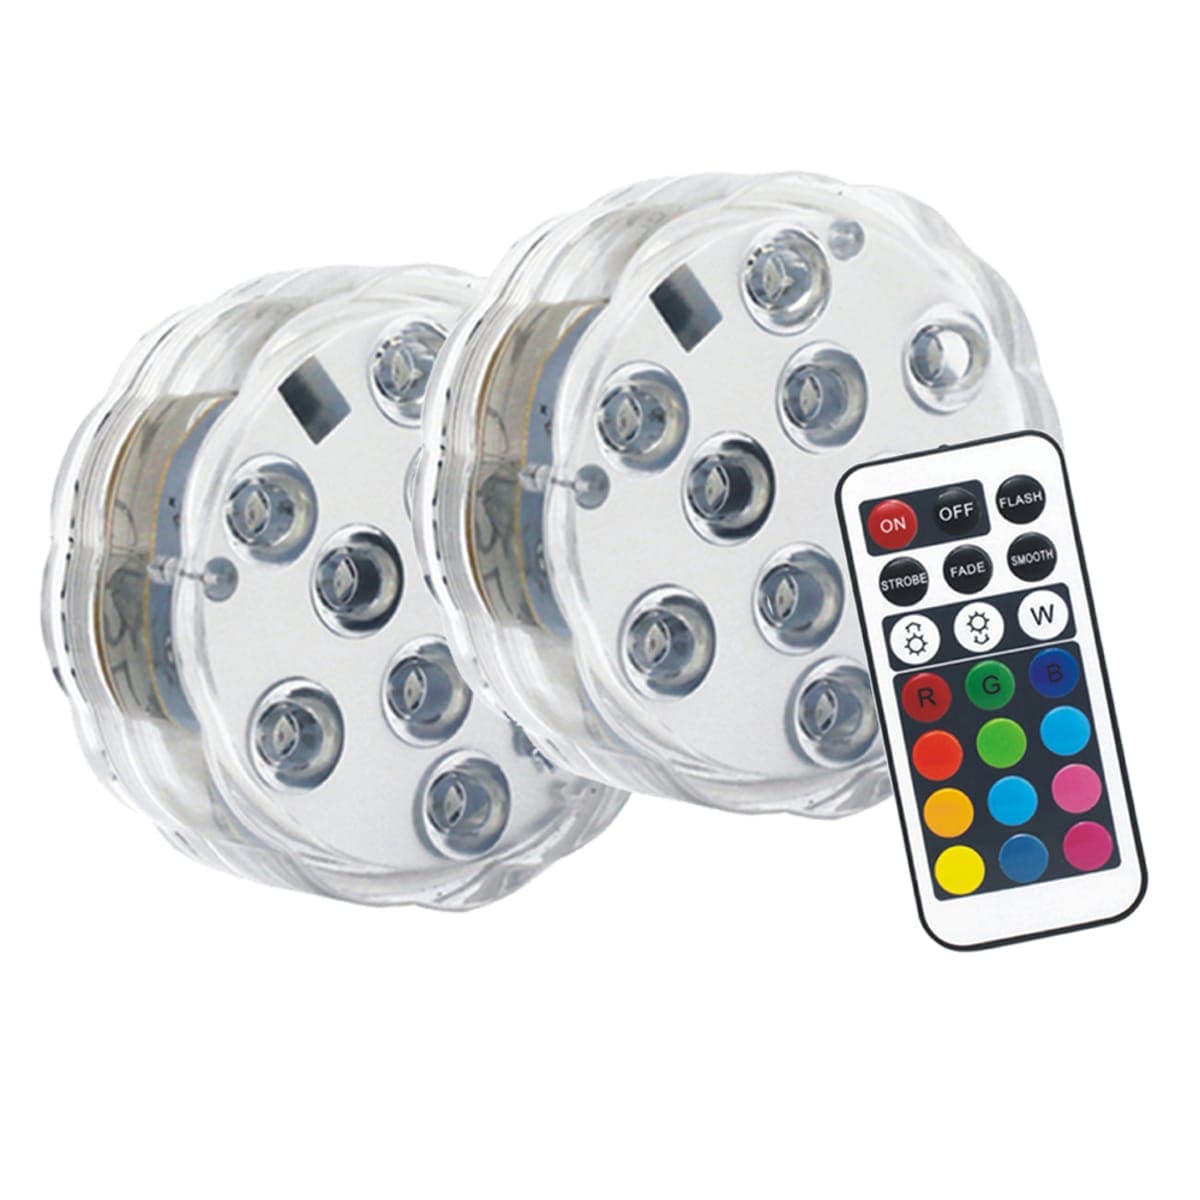 2 FLOATING RGB IP68 SOLAR LAMPS WITH REMOTE CONTROL - best price from Maltashopper.com BR420008010